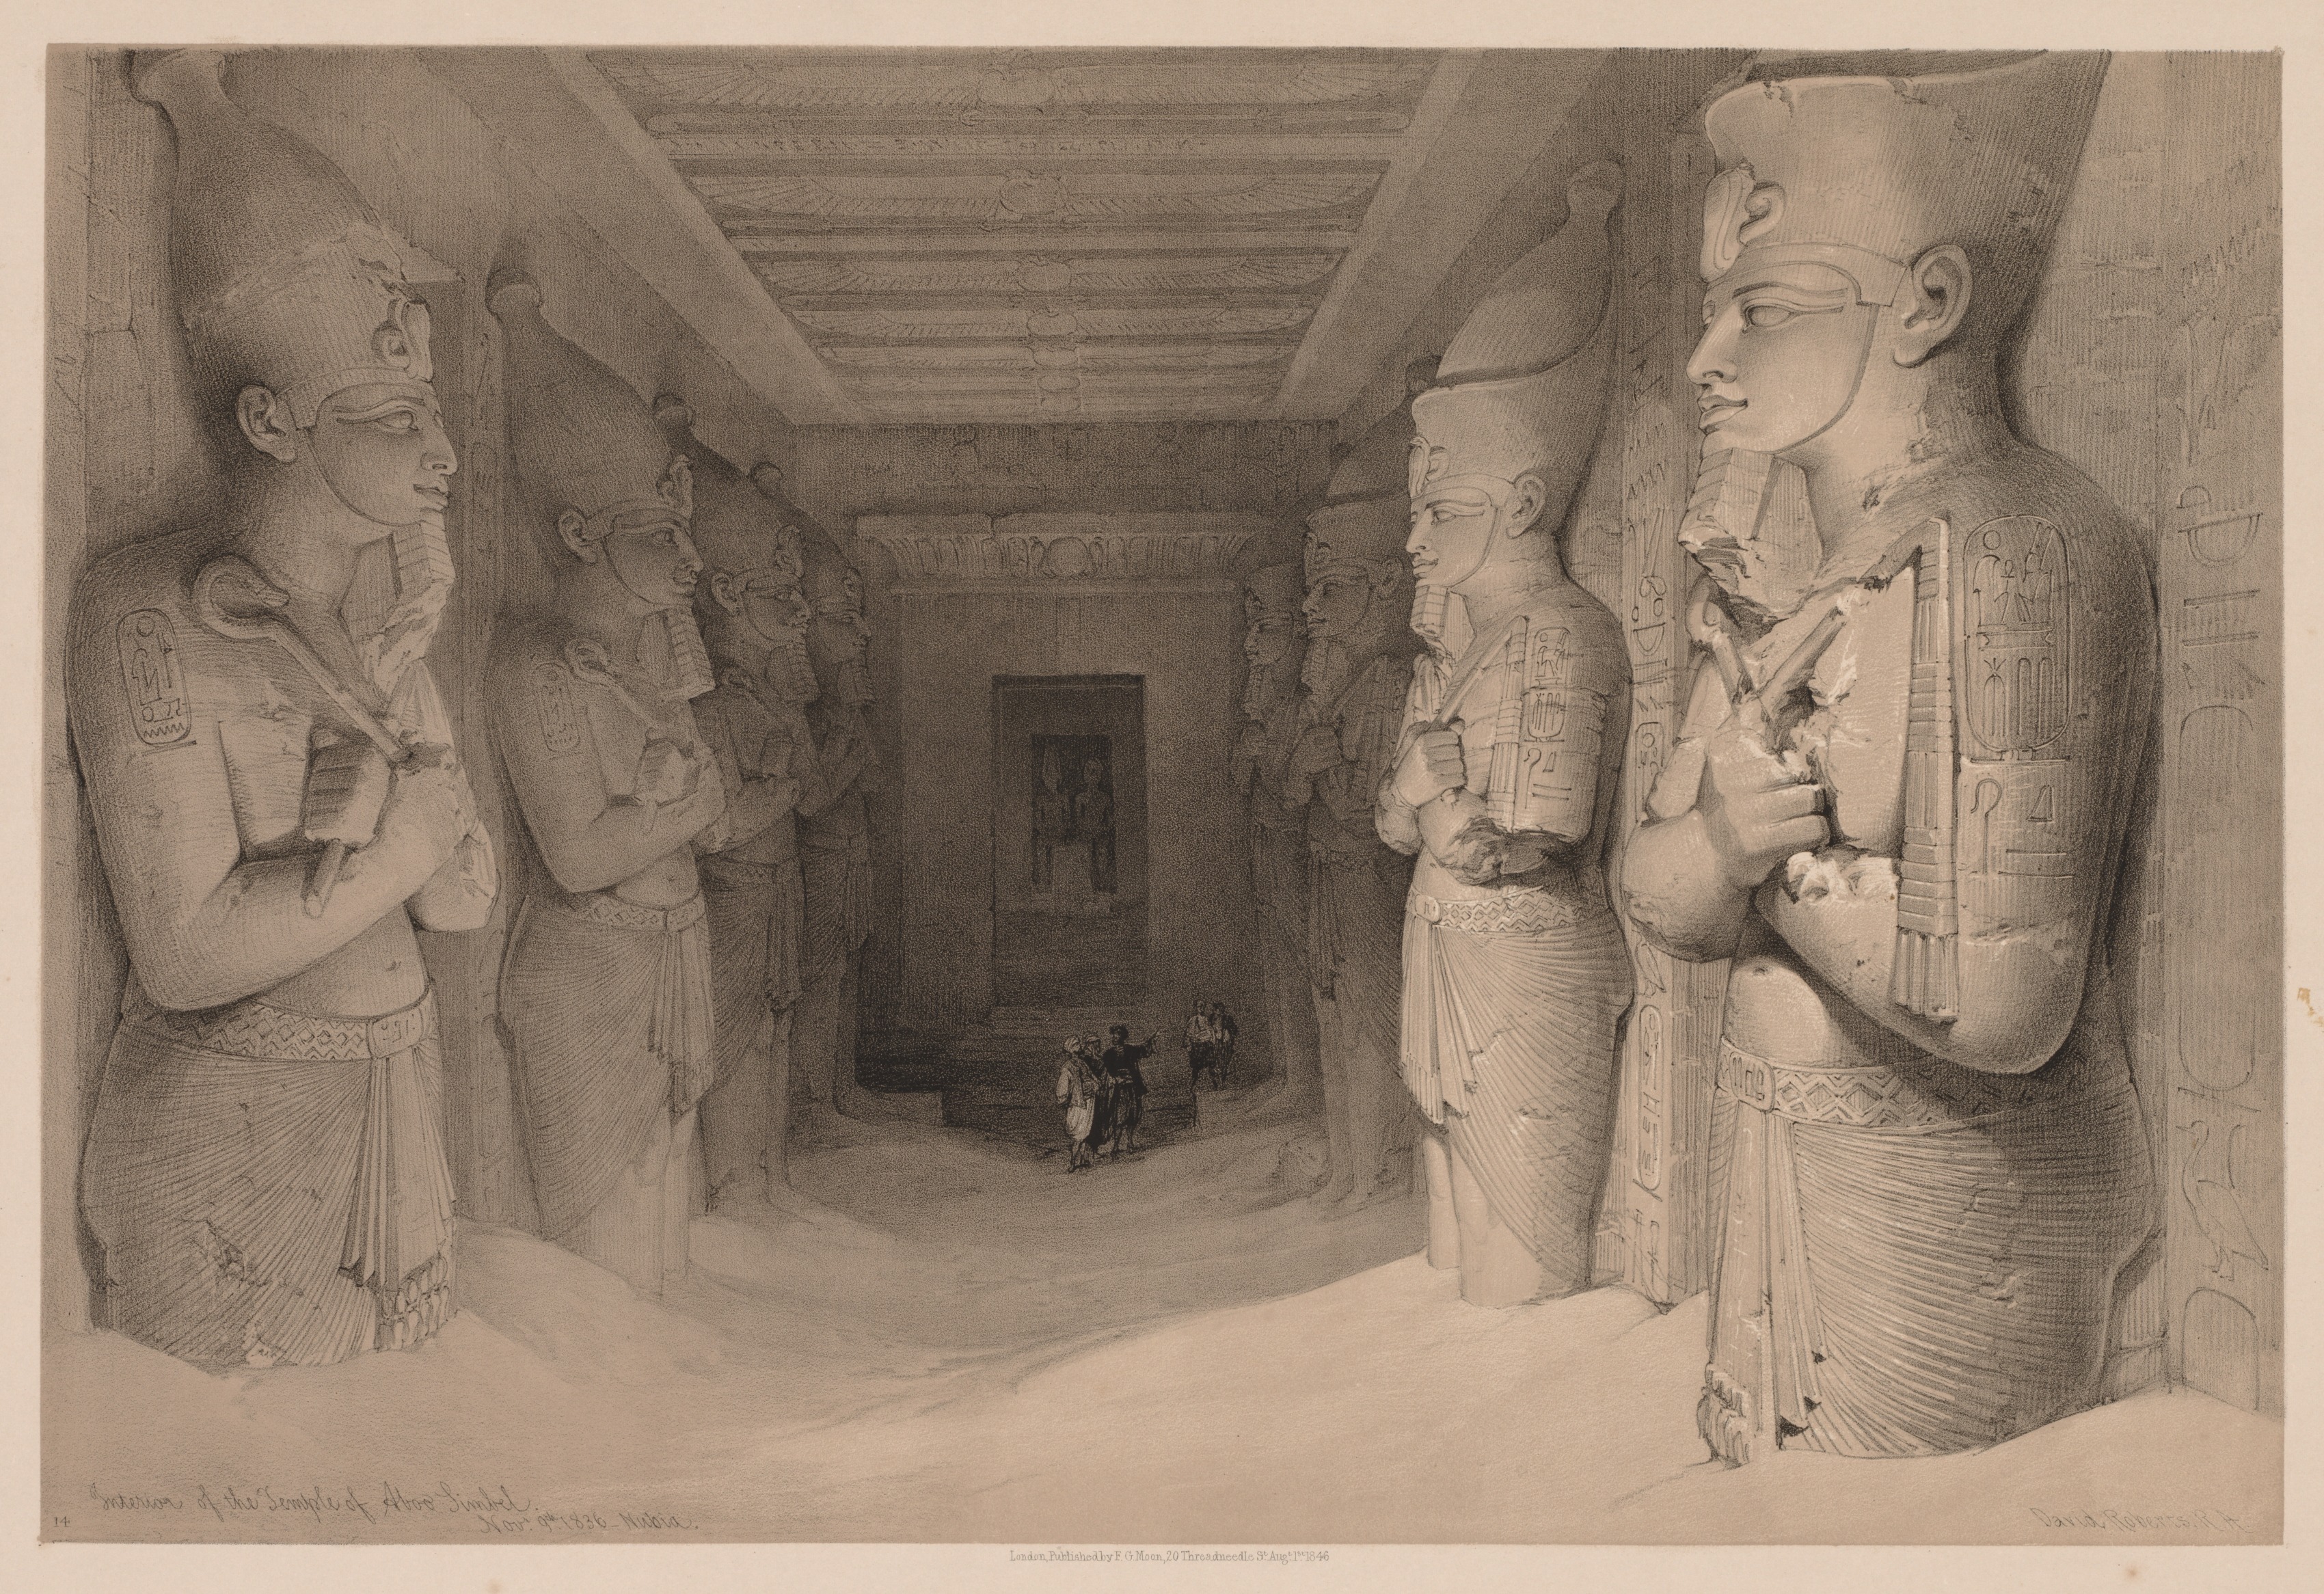 Egypt and Nubia:  Volume I - No. 14, Interior of the Temple Aboo Simbel